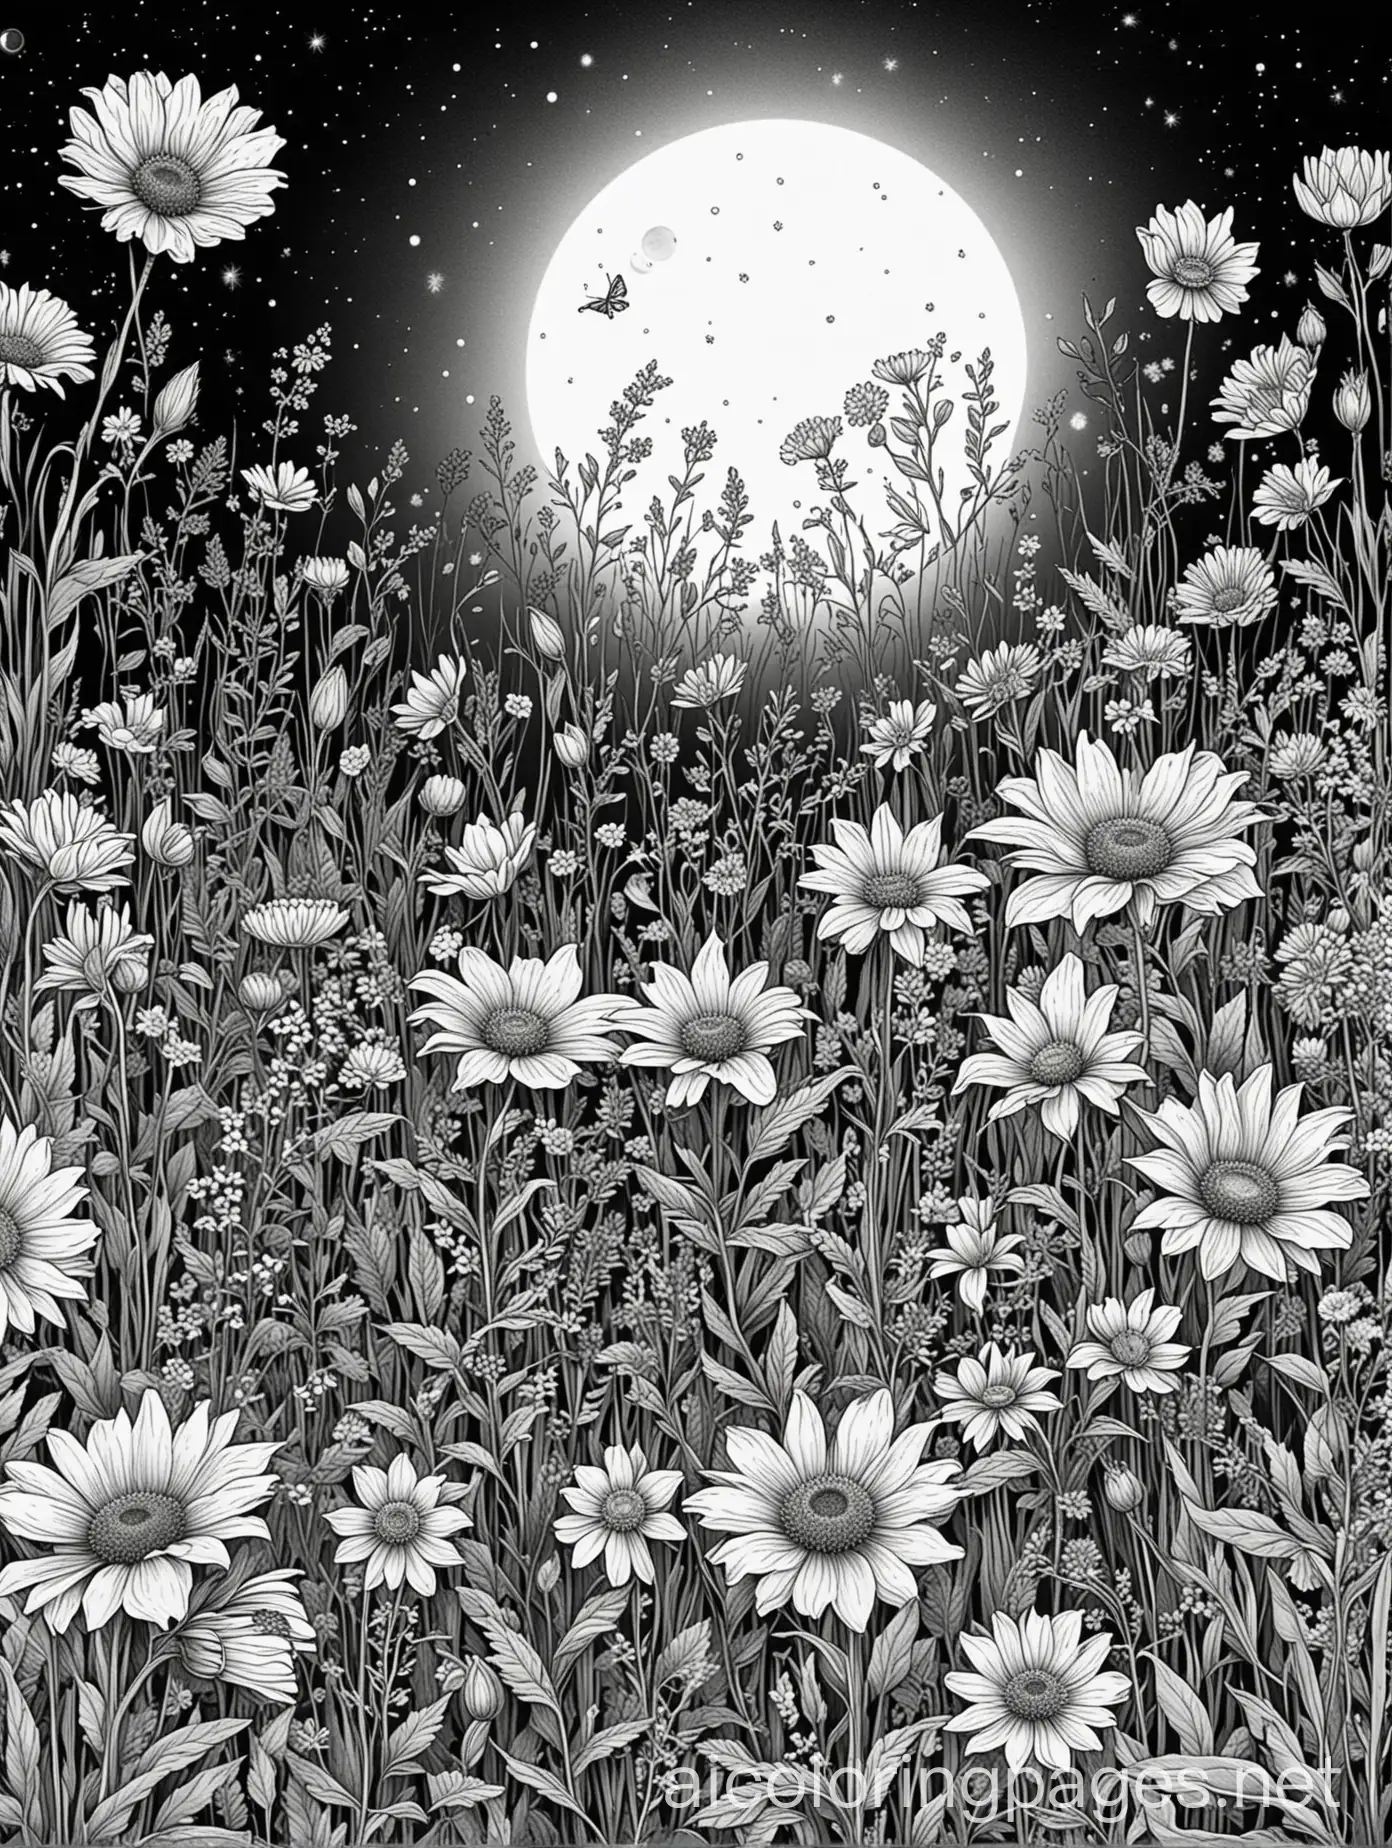 a beautiful field of wildflowers in the moonlight with some extreme closeup of some big fat flowers in the foreground, Coloring Page, black and white, line art, white background, Simplicity, Ample White Space. The background of the coloring page is plain white to make it easy for young children to color within the lines. The outlines of all the subjects are easy to distinguish, making it simple for kids to color without too much difficulty